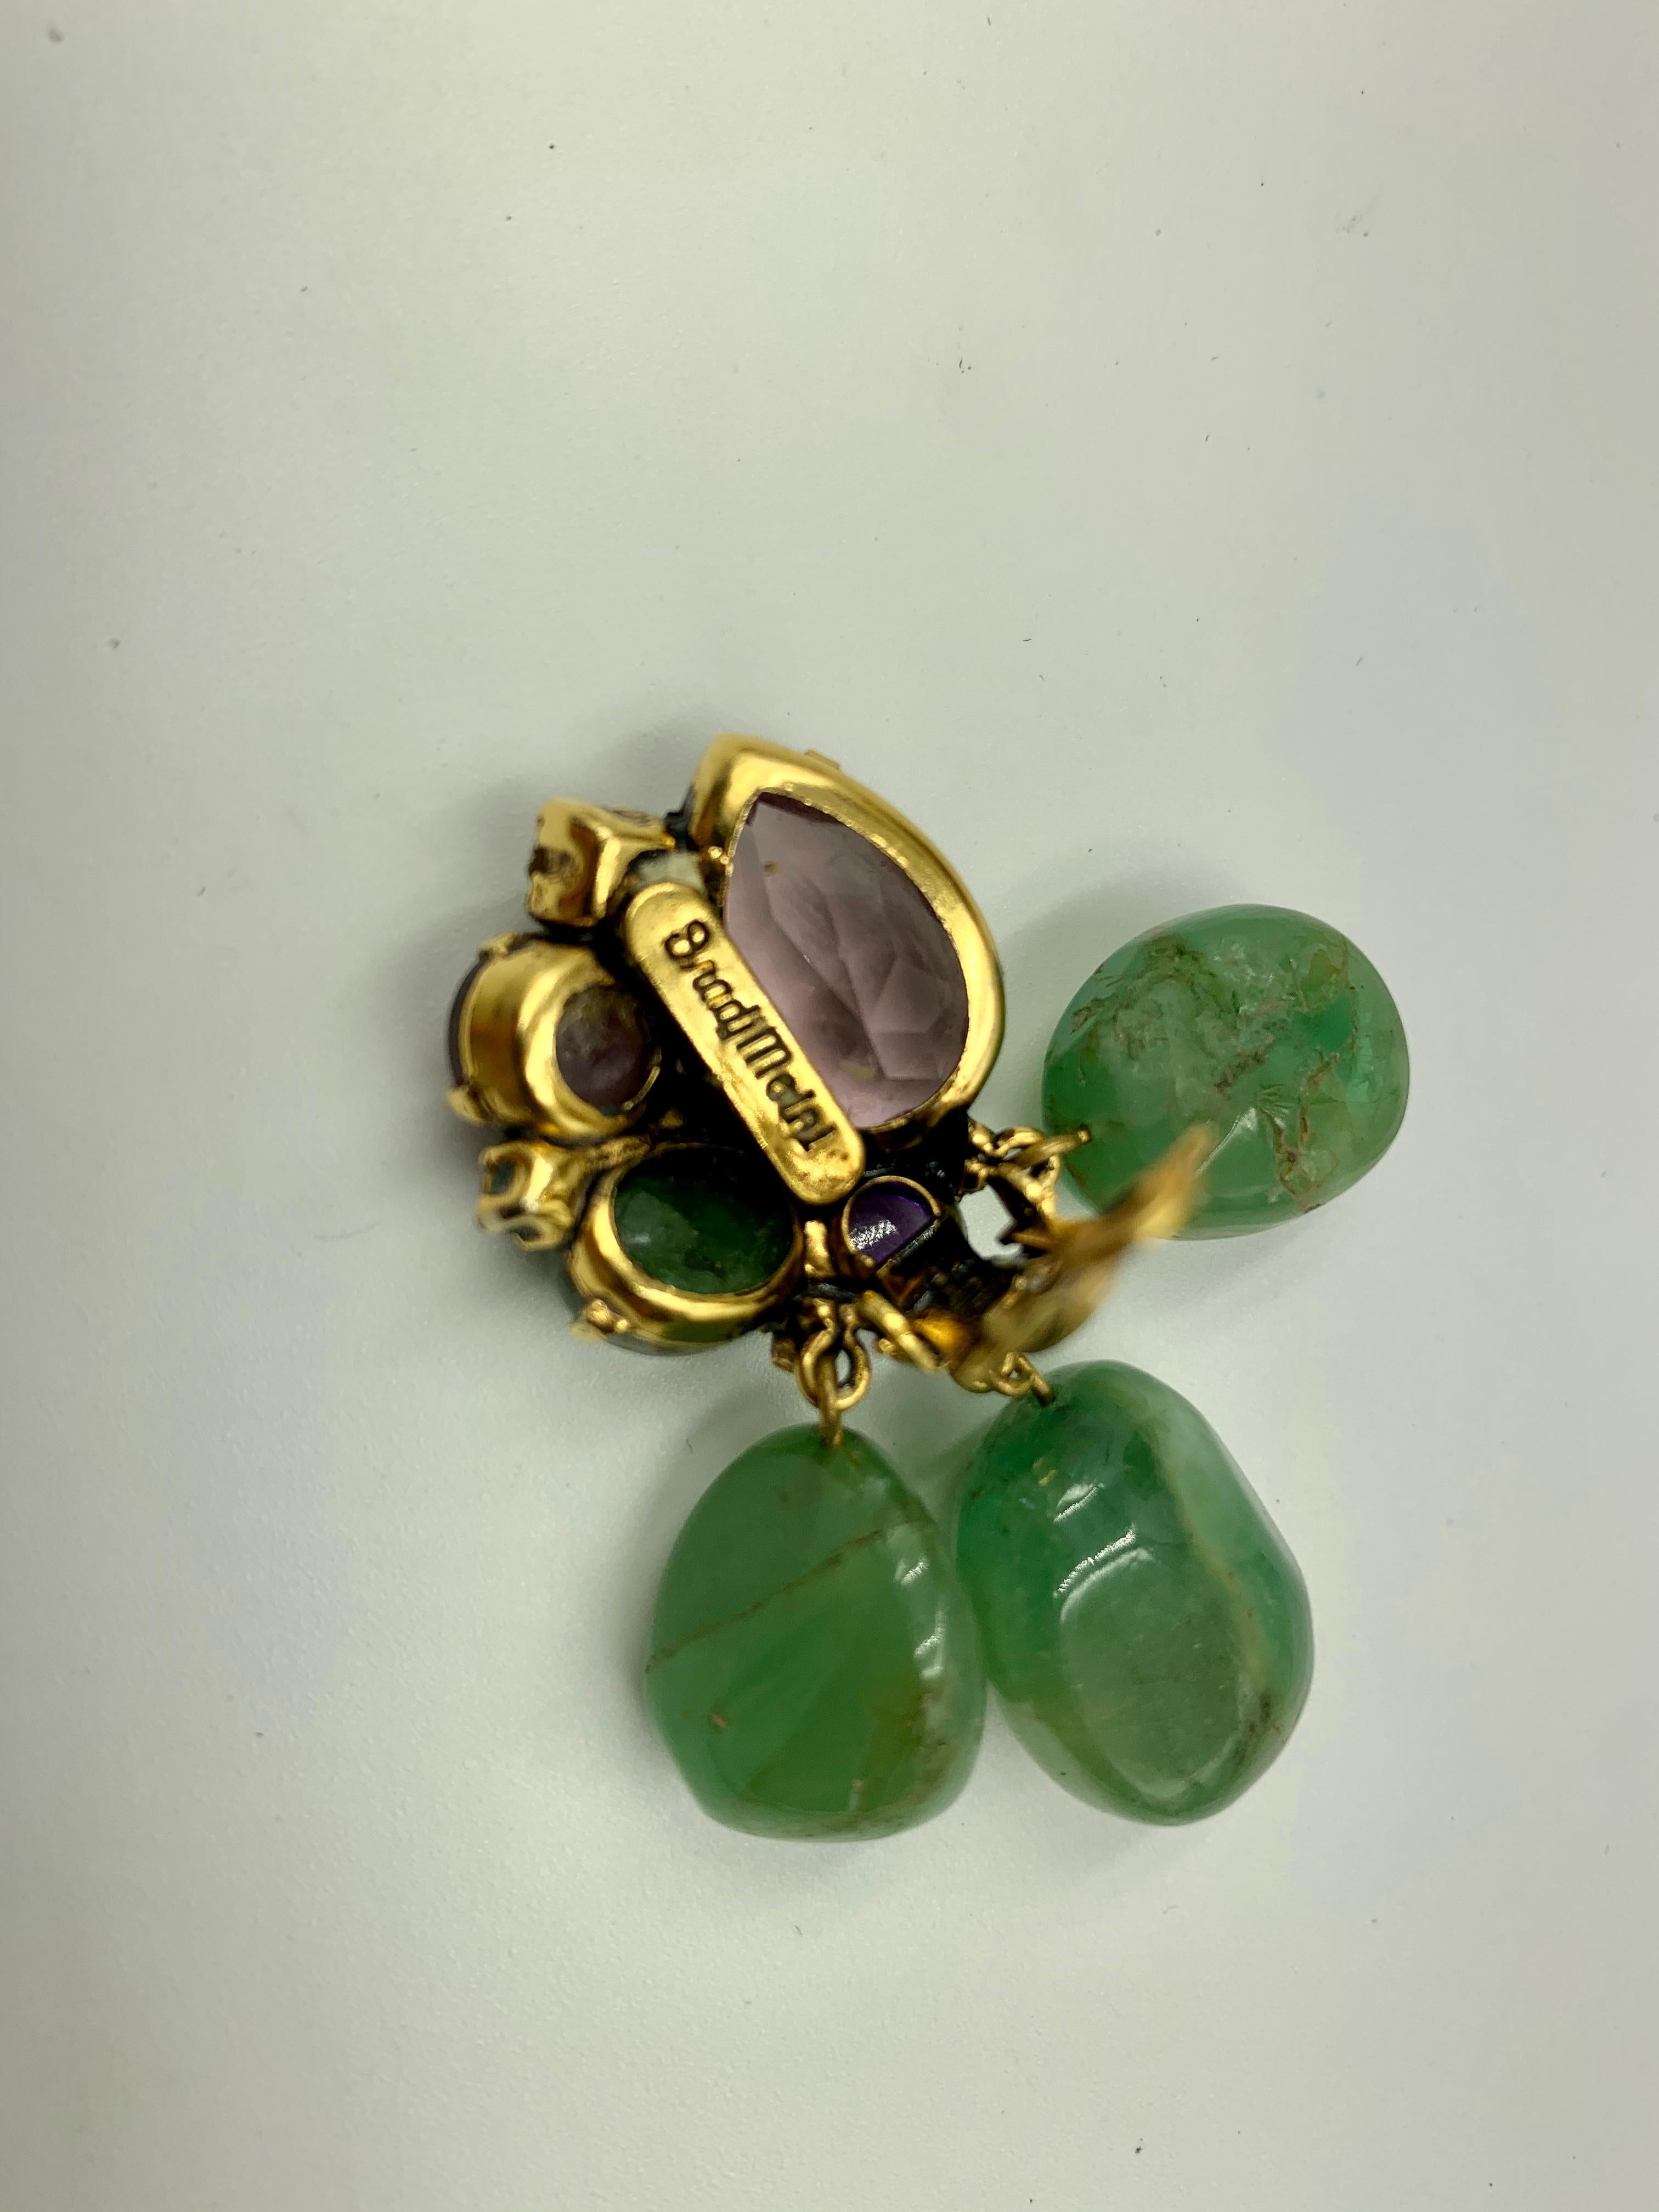 Cabochon Vintage Iradj Moini Amethyst, Fluorite and Crystal Ear Clips, late 20th Century